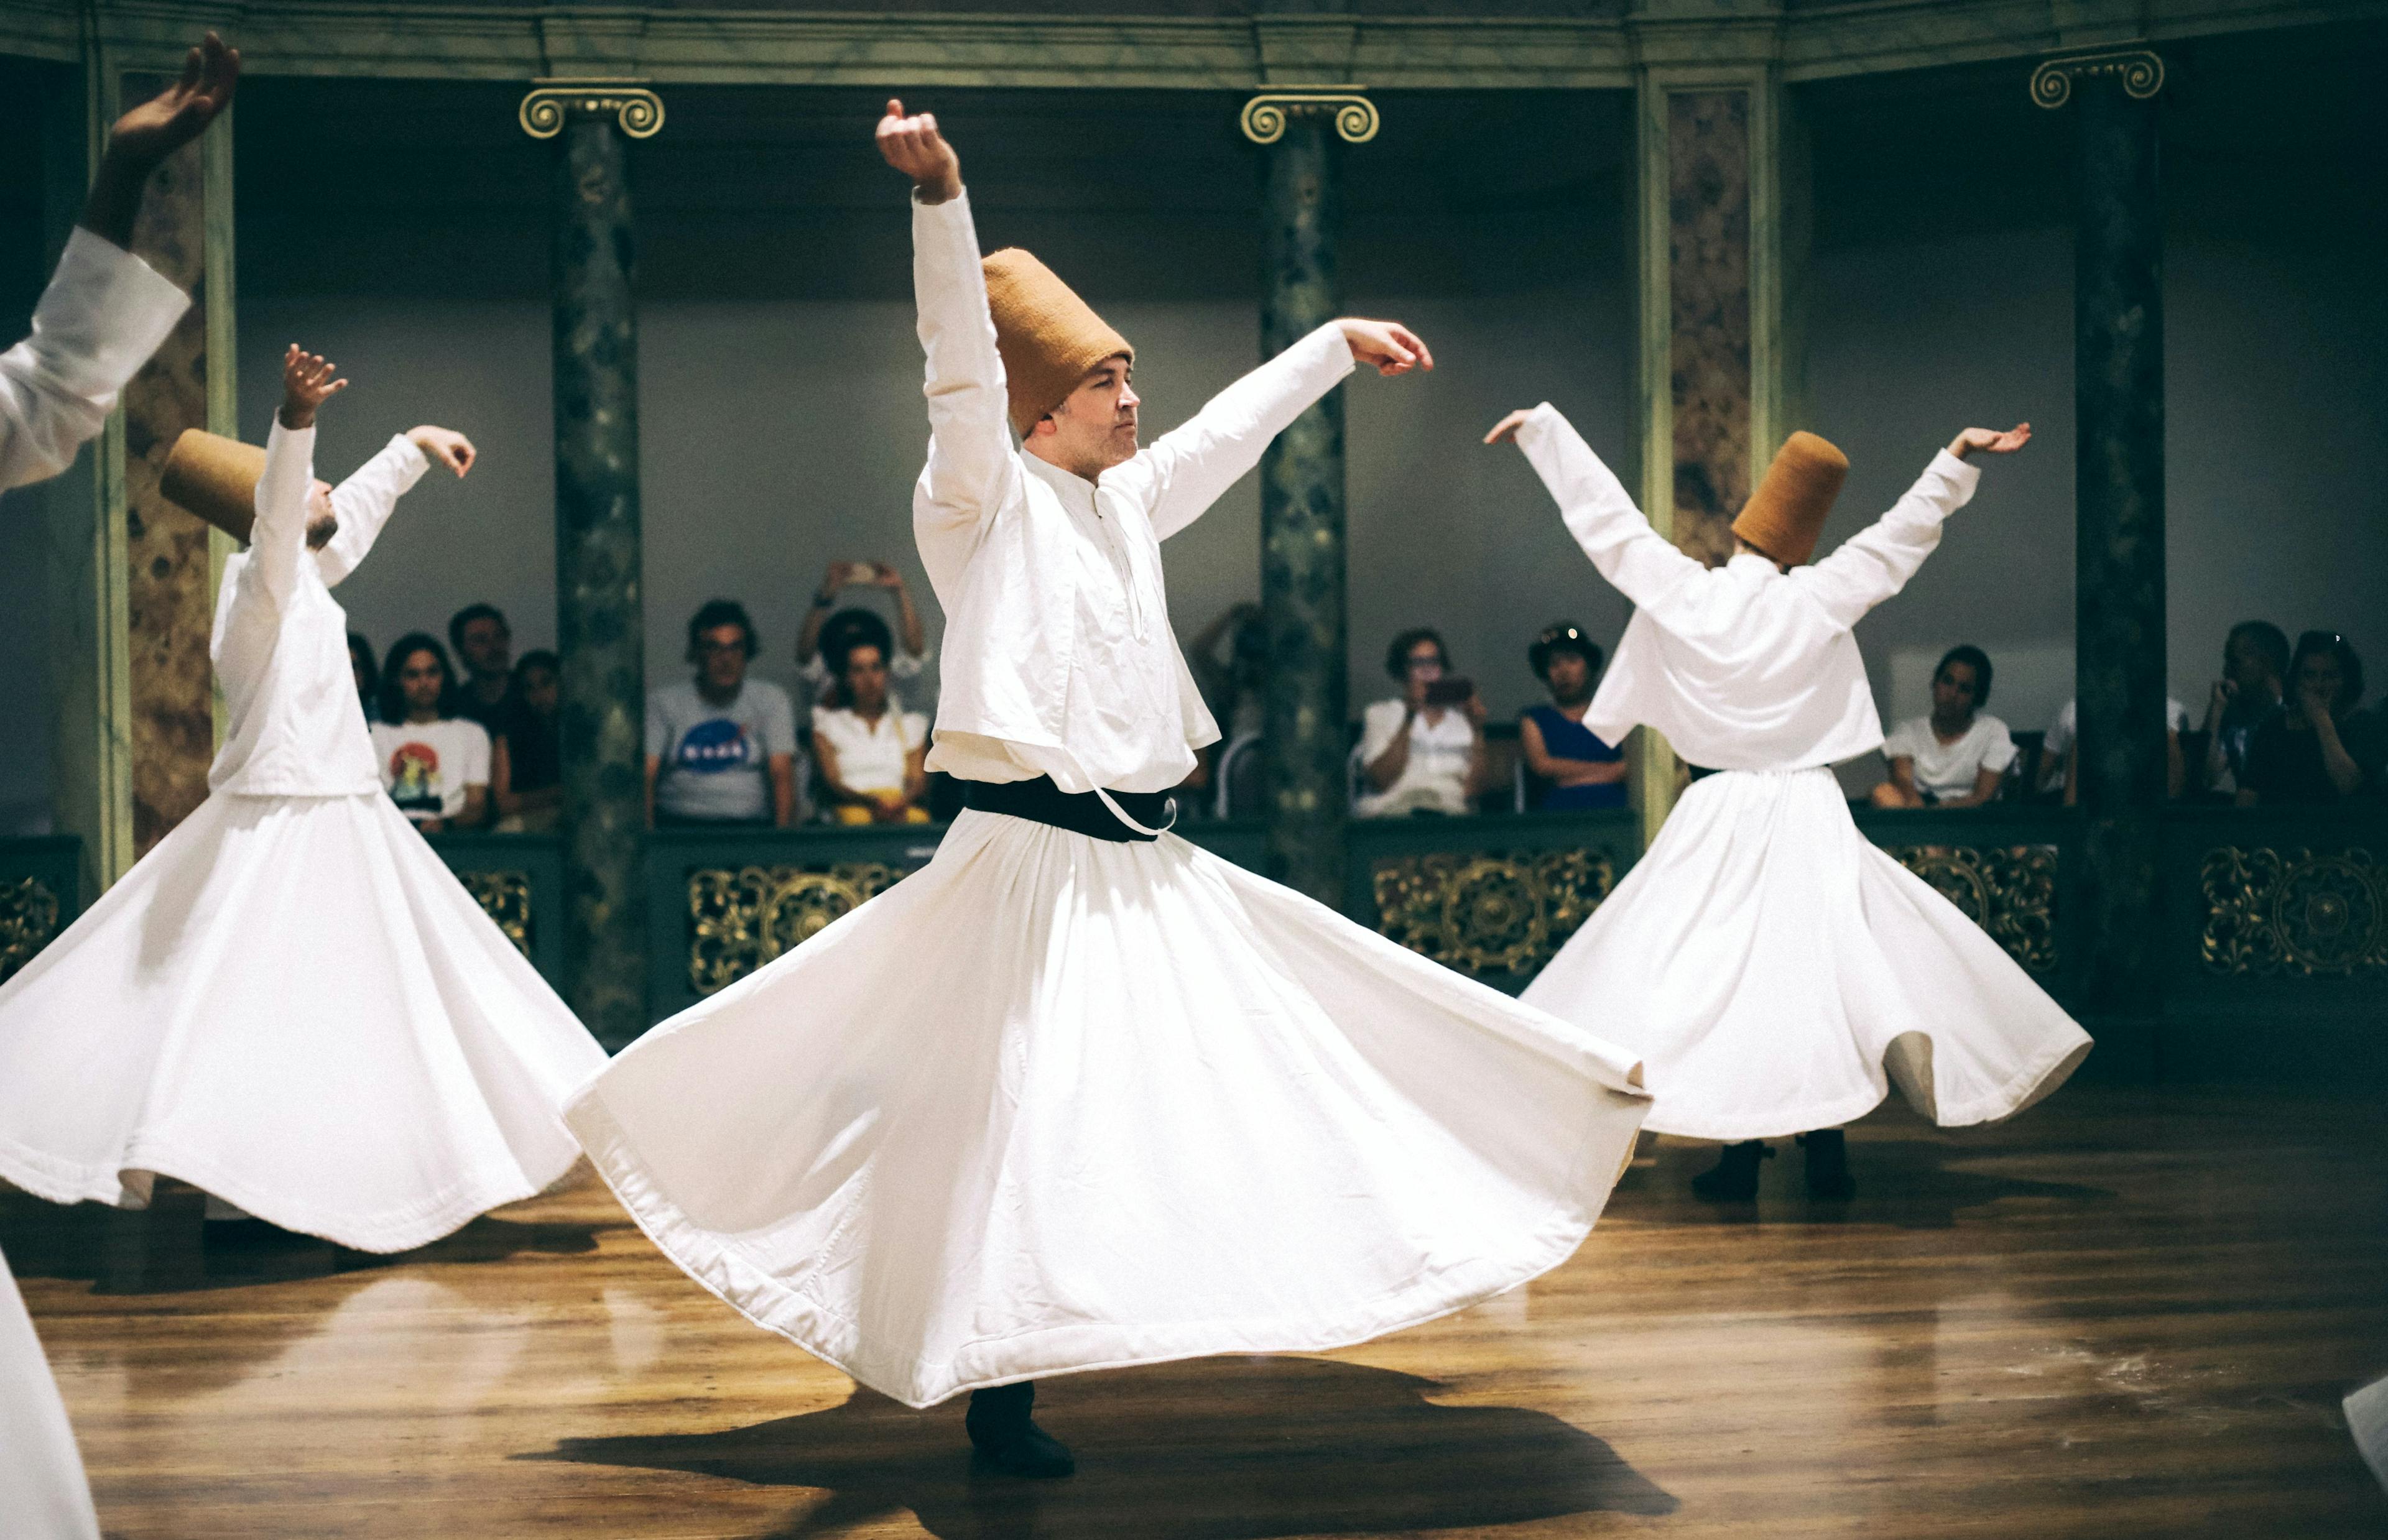 Dancing dervishes in Istanbul Turkey